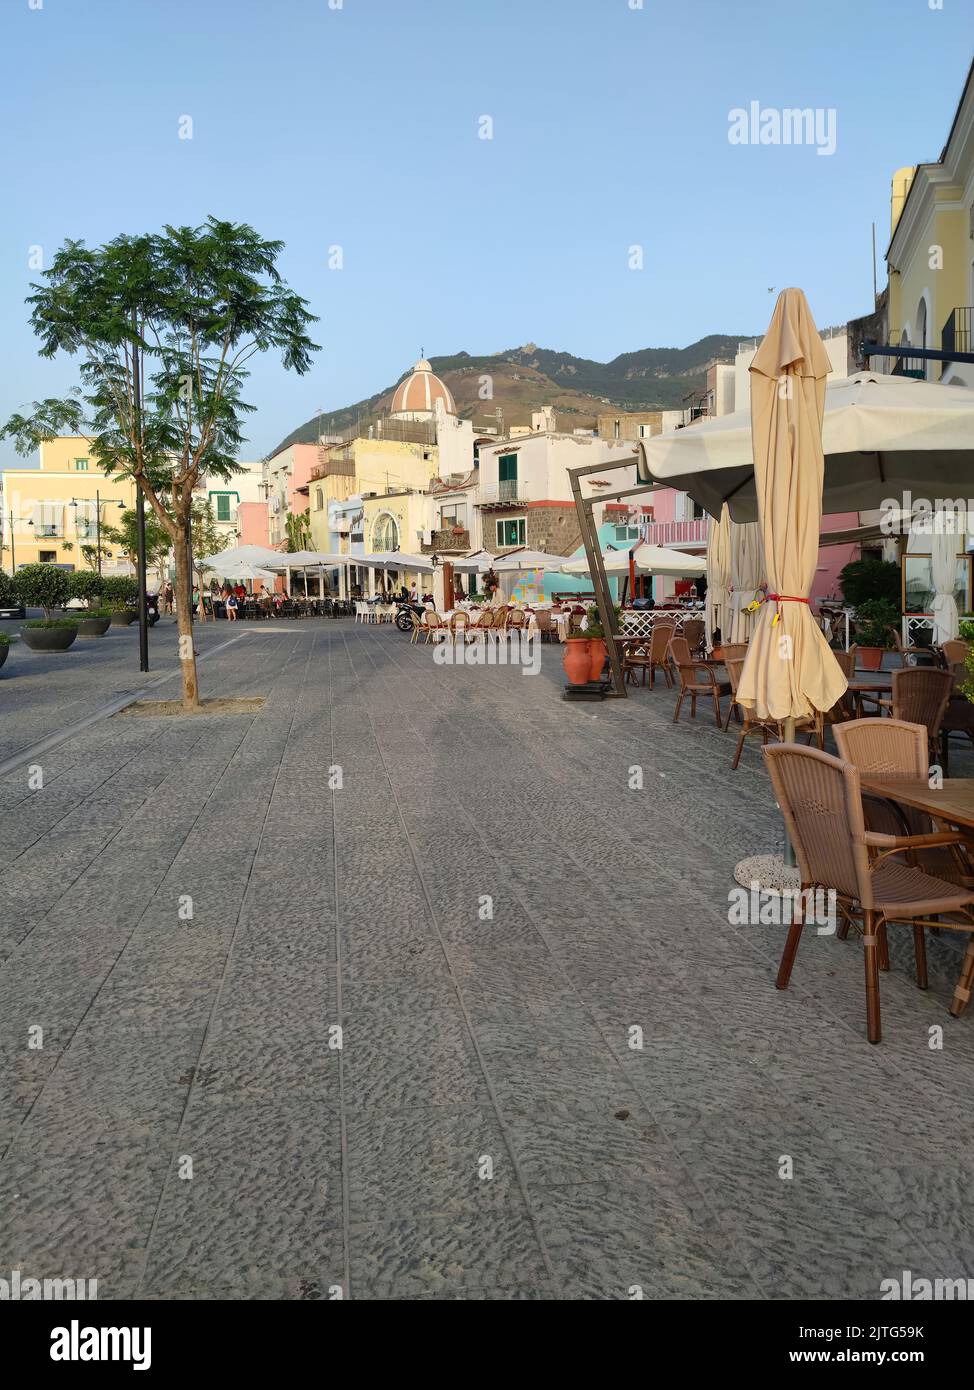 The beautiful town of Forio municipality of the island of Ischia, one of the most beautiful and characteristic places on the island (1) Stock Photo